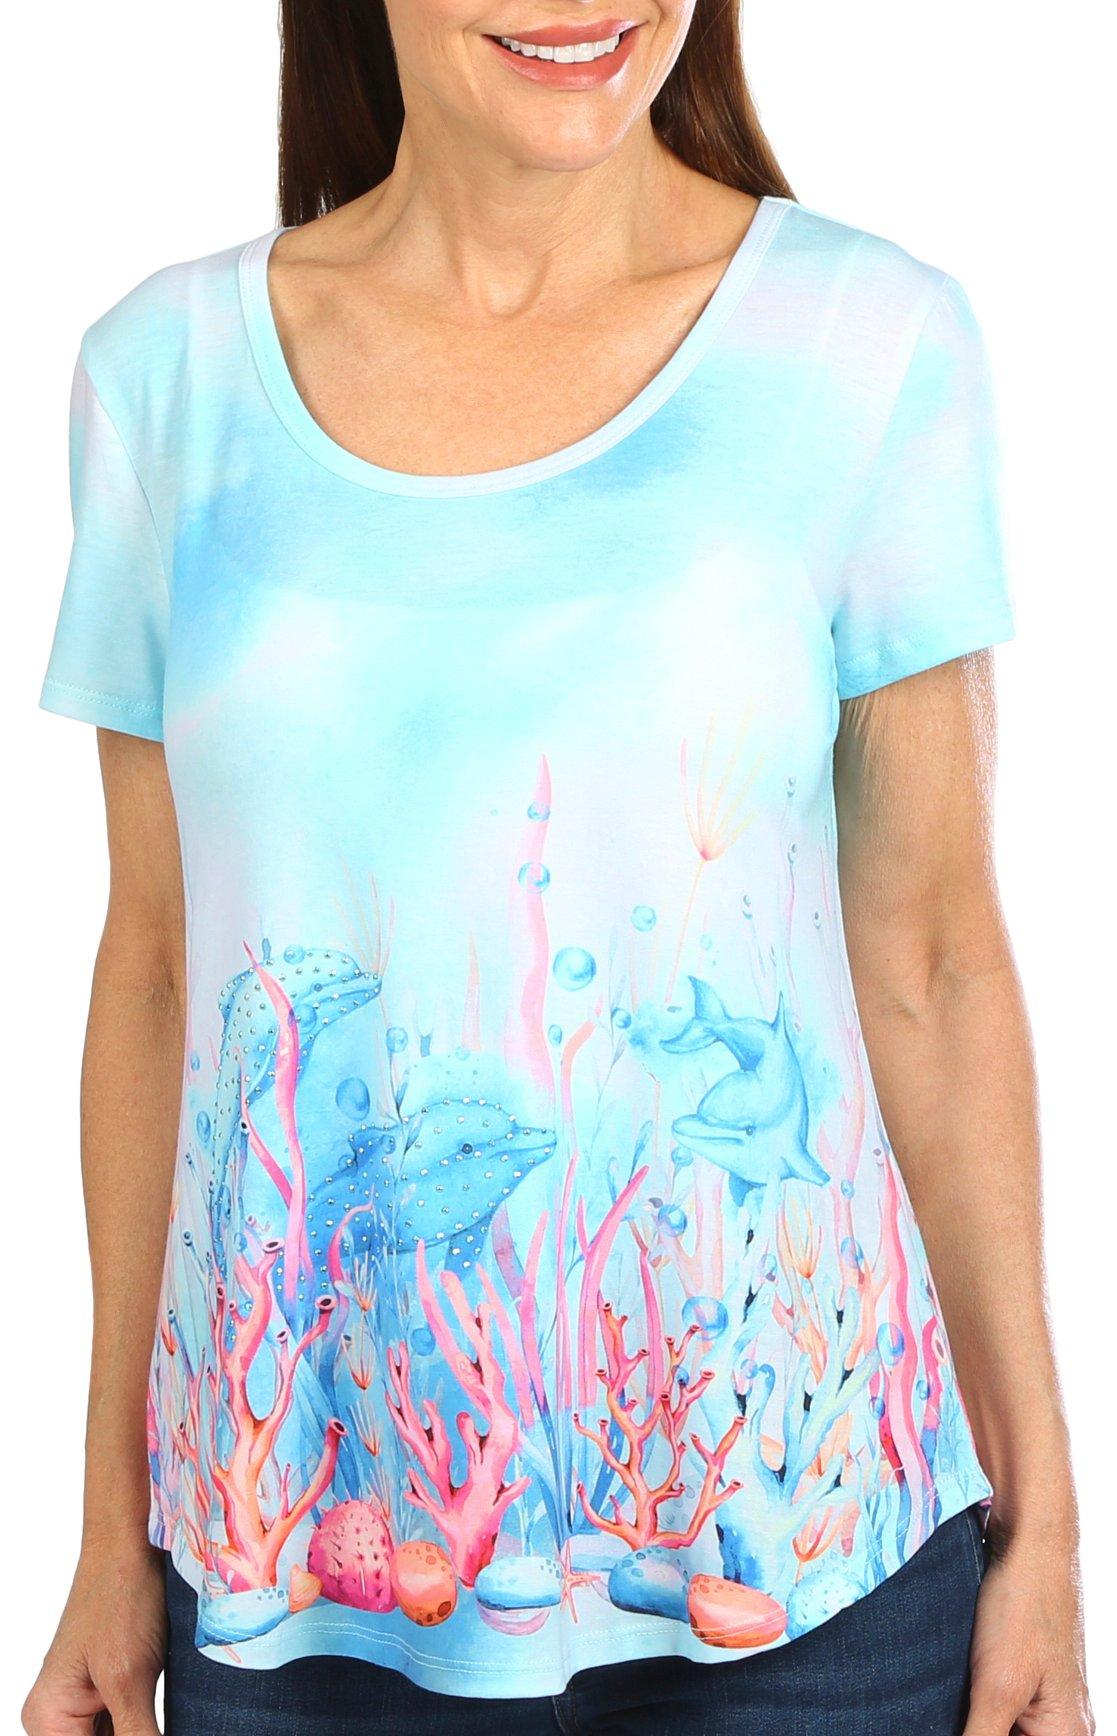 Coral Bay Petite Dolphin Play Short Sleeve Top